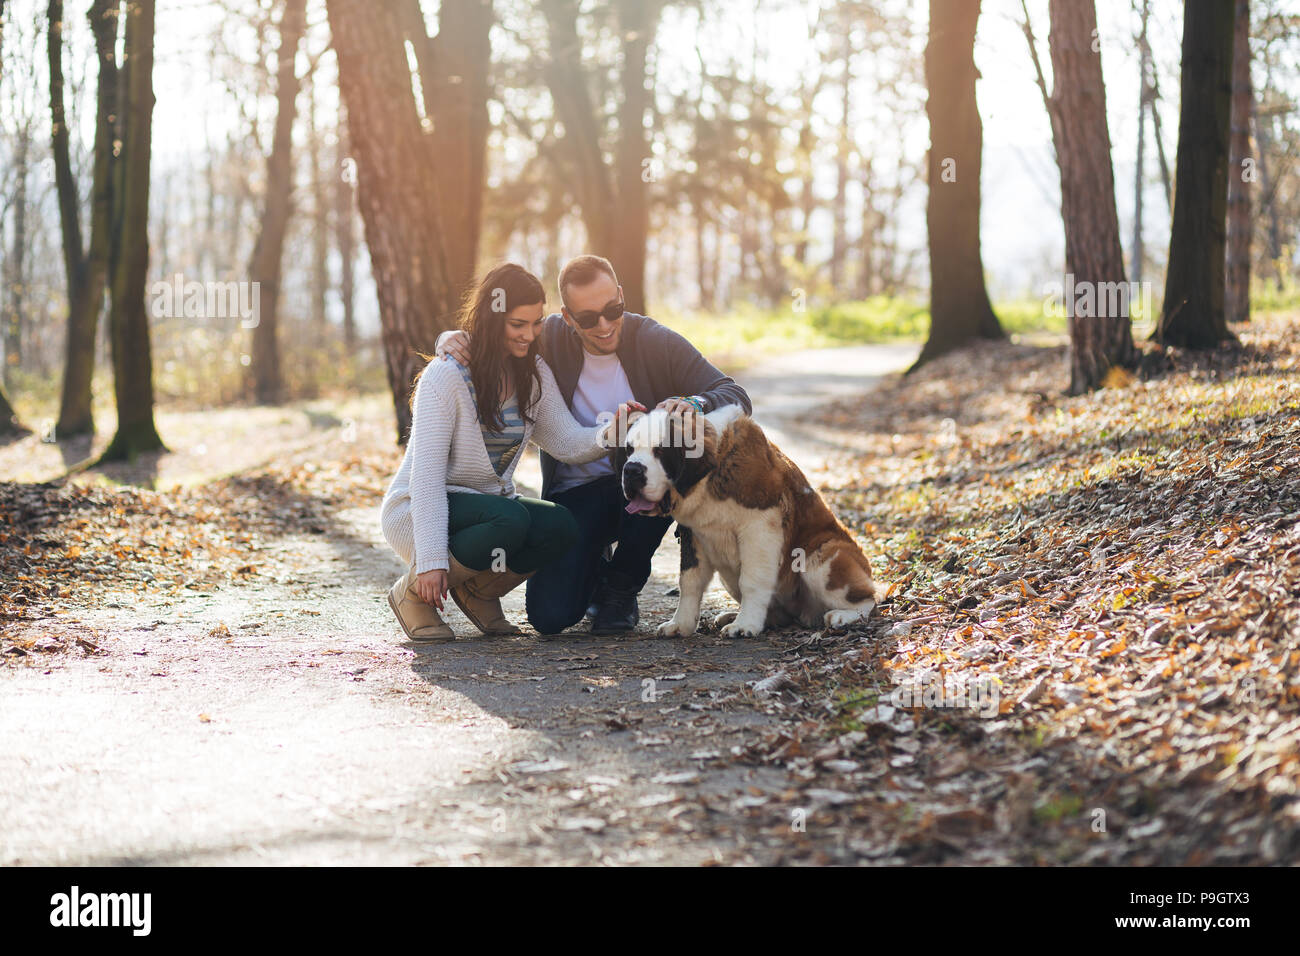 Young couple enjoying nature outdoors together with their Saint Bernard puppy. Stock Photo